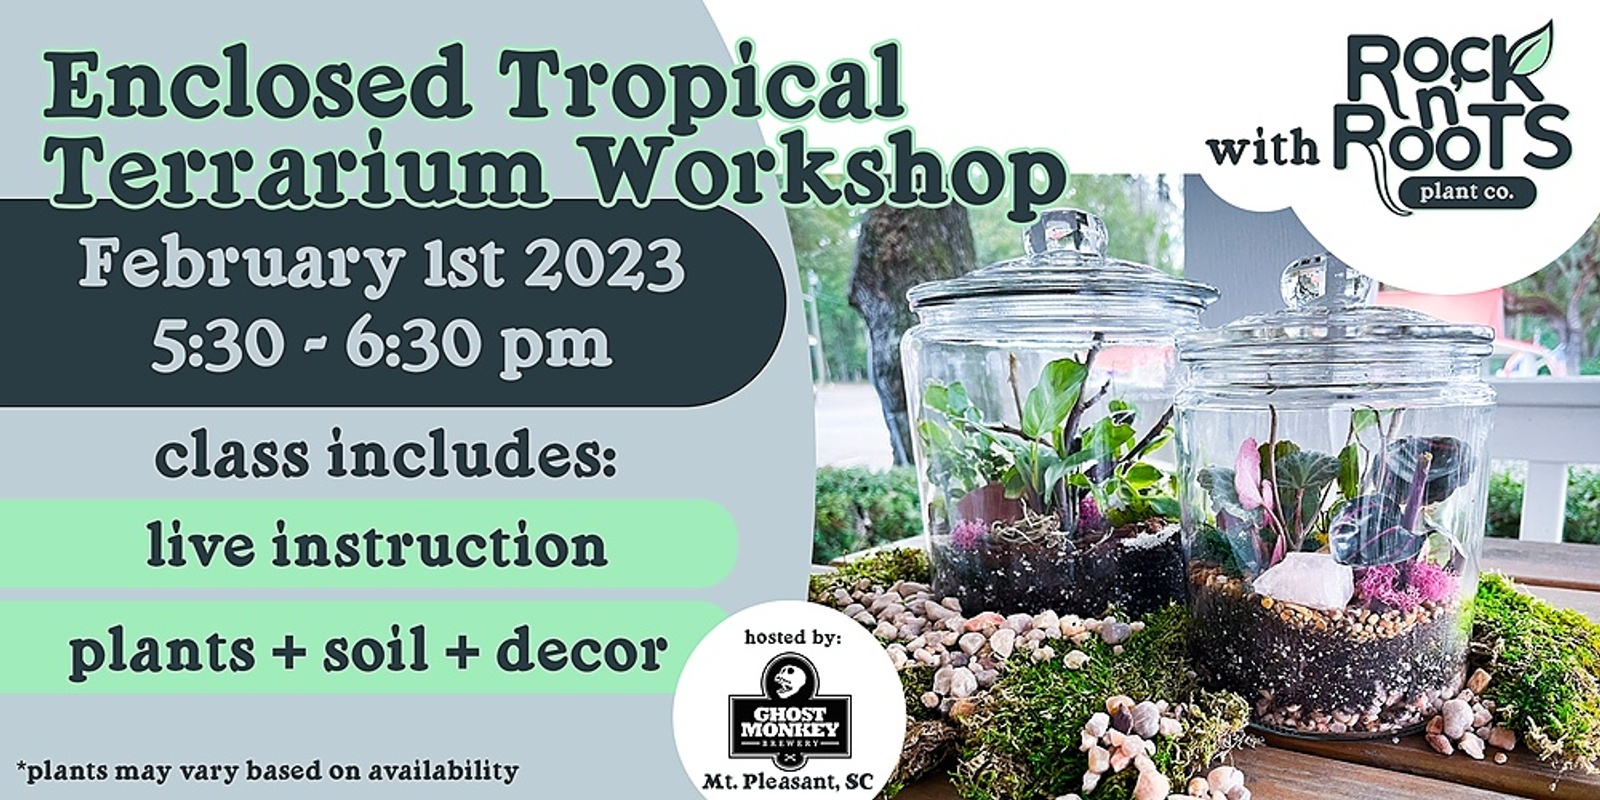 Banner image for Enclosed Tropical Terrarium Workshop at Ghost Monkey Brewery (Mount Pleasant, SC)